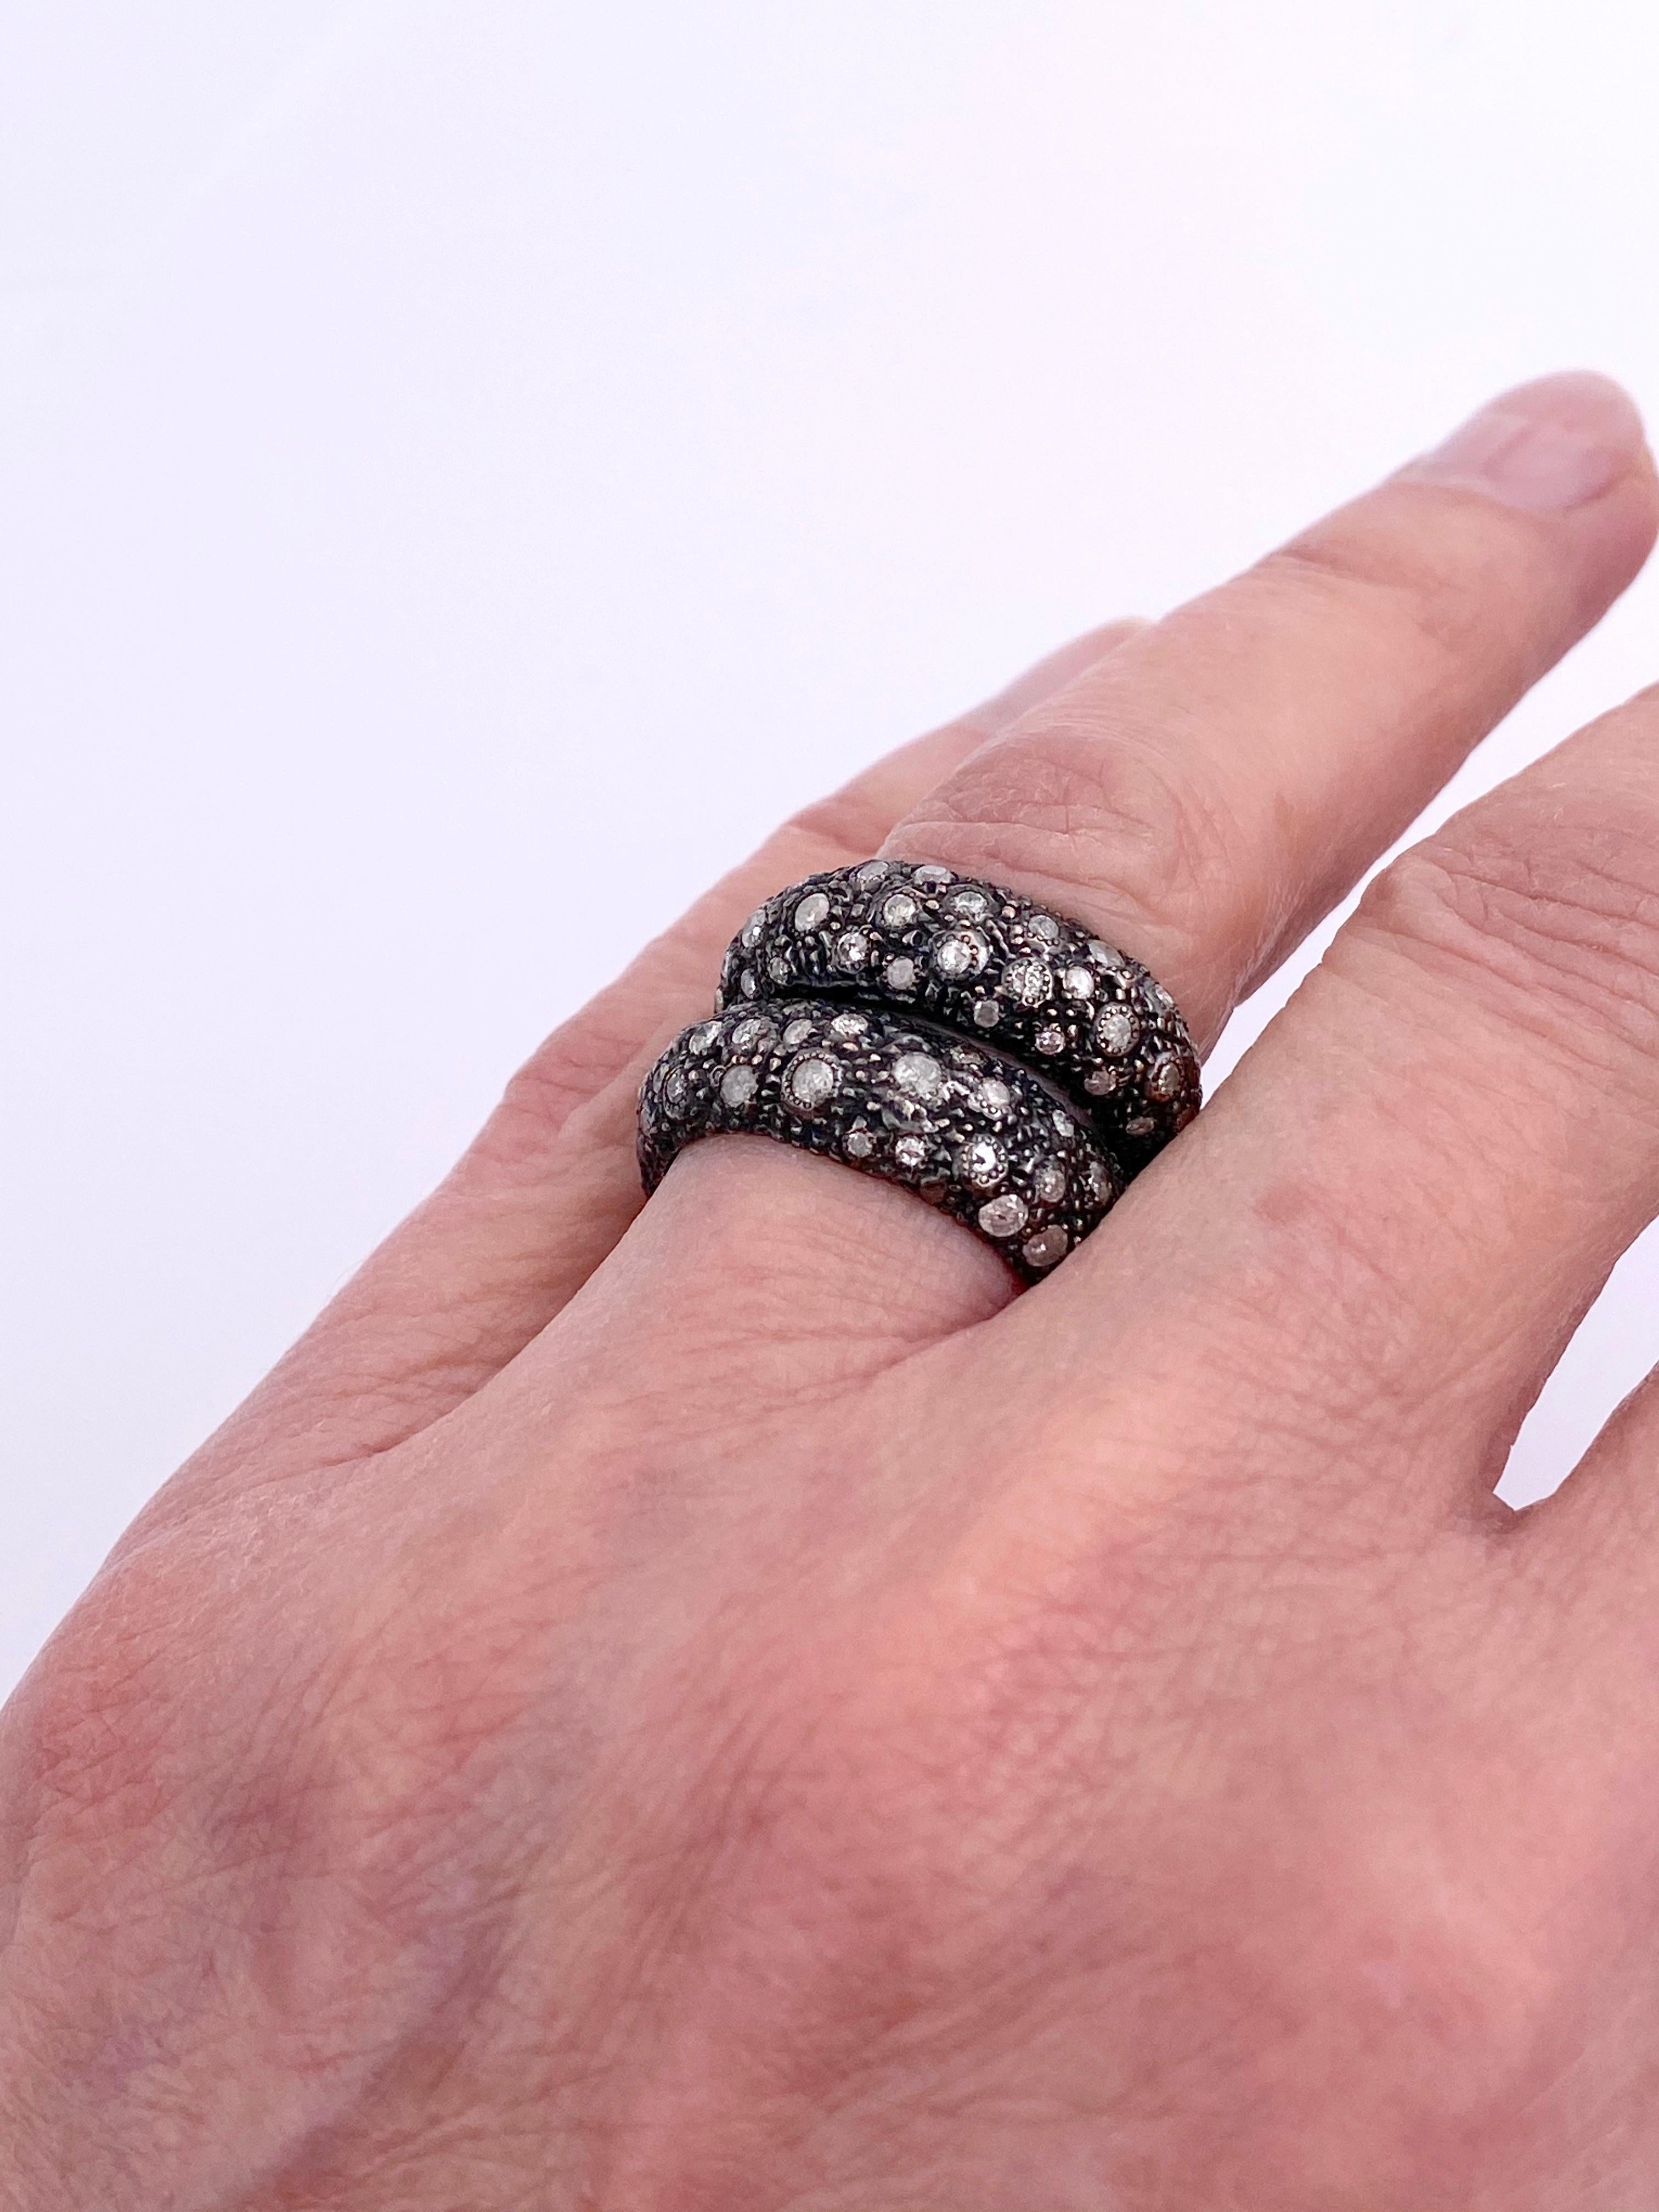 Contemporary 18 karats Rose Gold Black Rhodium and  2.25 karat Grey Diamonds Rock Cocktail Design Ring
This ring is totally handcrafted in pure rose black rhodium gold and embellished with nice 2.25 karat grey diamonds. 
All sizes available in three